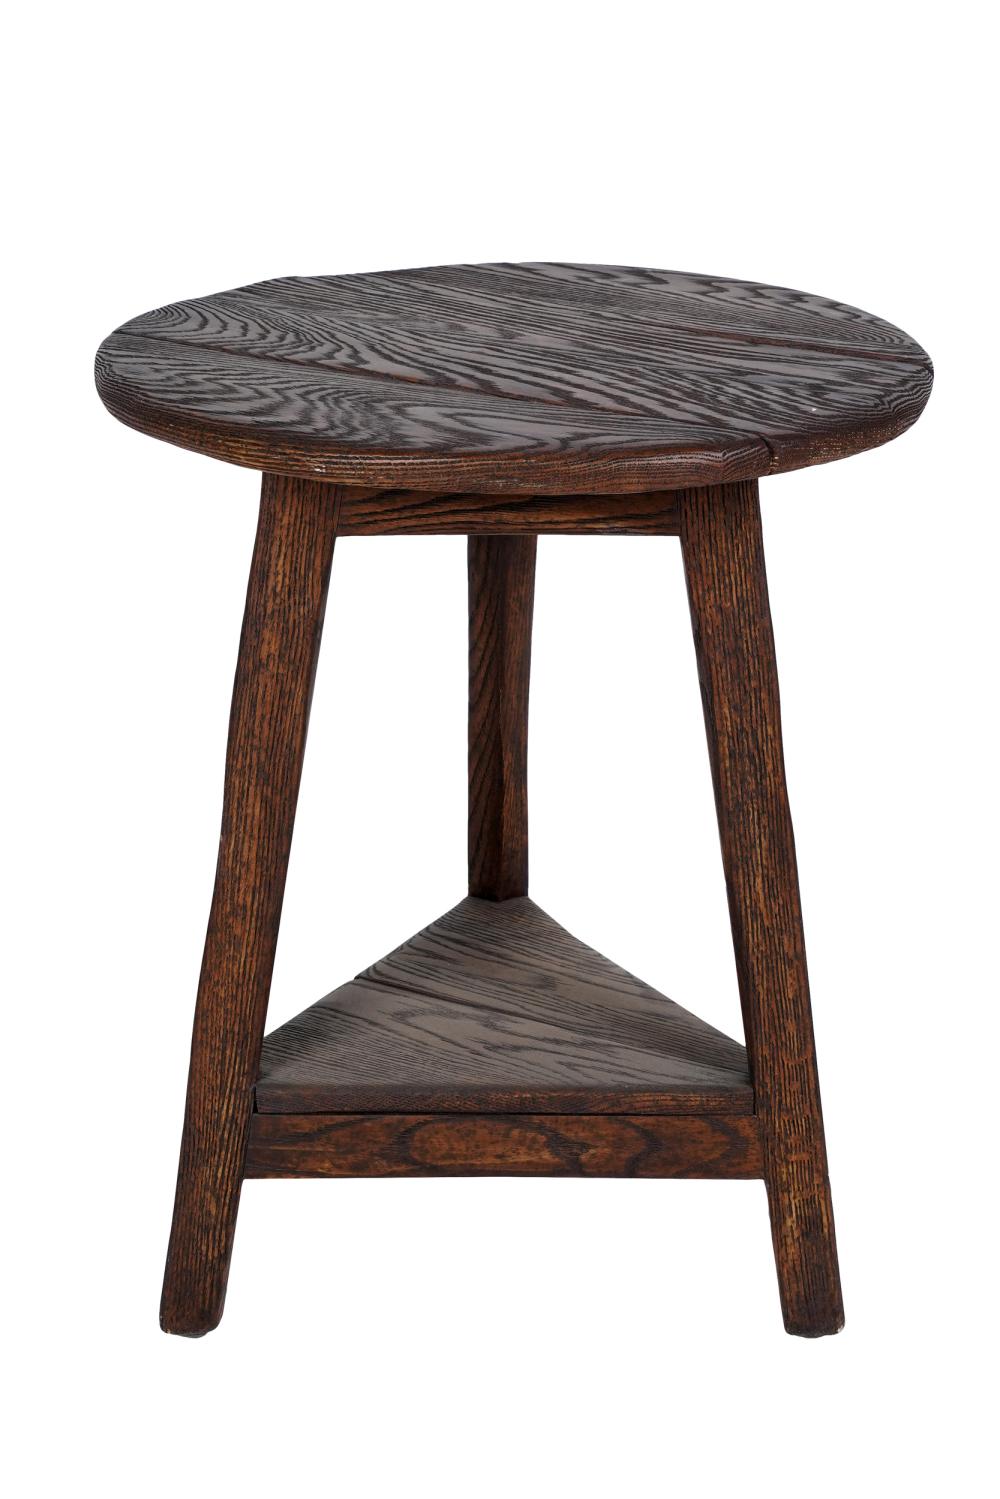 BAUSMAN STAINED WOOD CRICKET TABLEwith 33434e